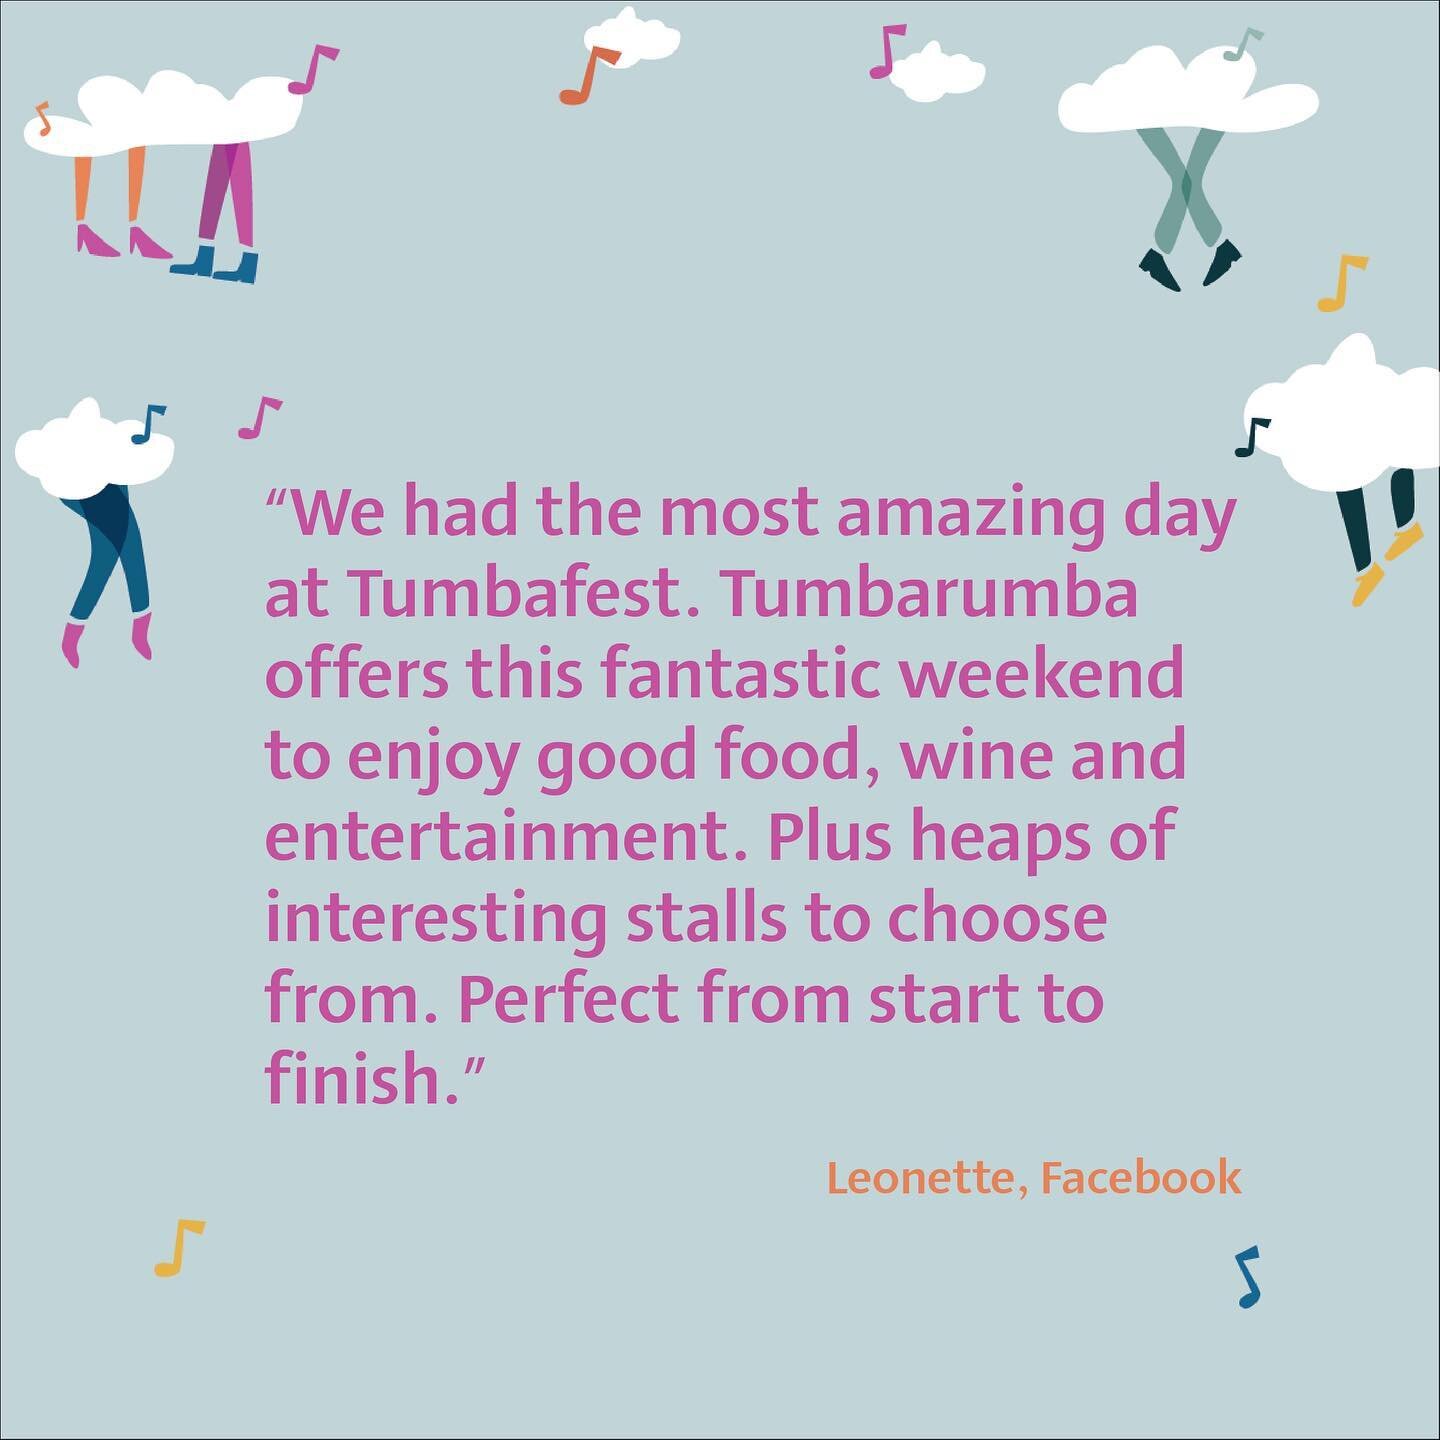 Leonette had the most amazing day at Tumbafest and you can too on Saturday 27 &amp; Sunday 28 February 🎉
 
With a line-up featuring @chocolatestarfishband, @hurricane_fall and @thenewgraces what&rsquo;s not to love?
 
Grab your tickets via the link 